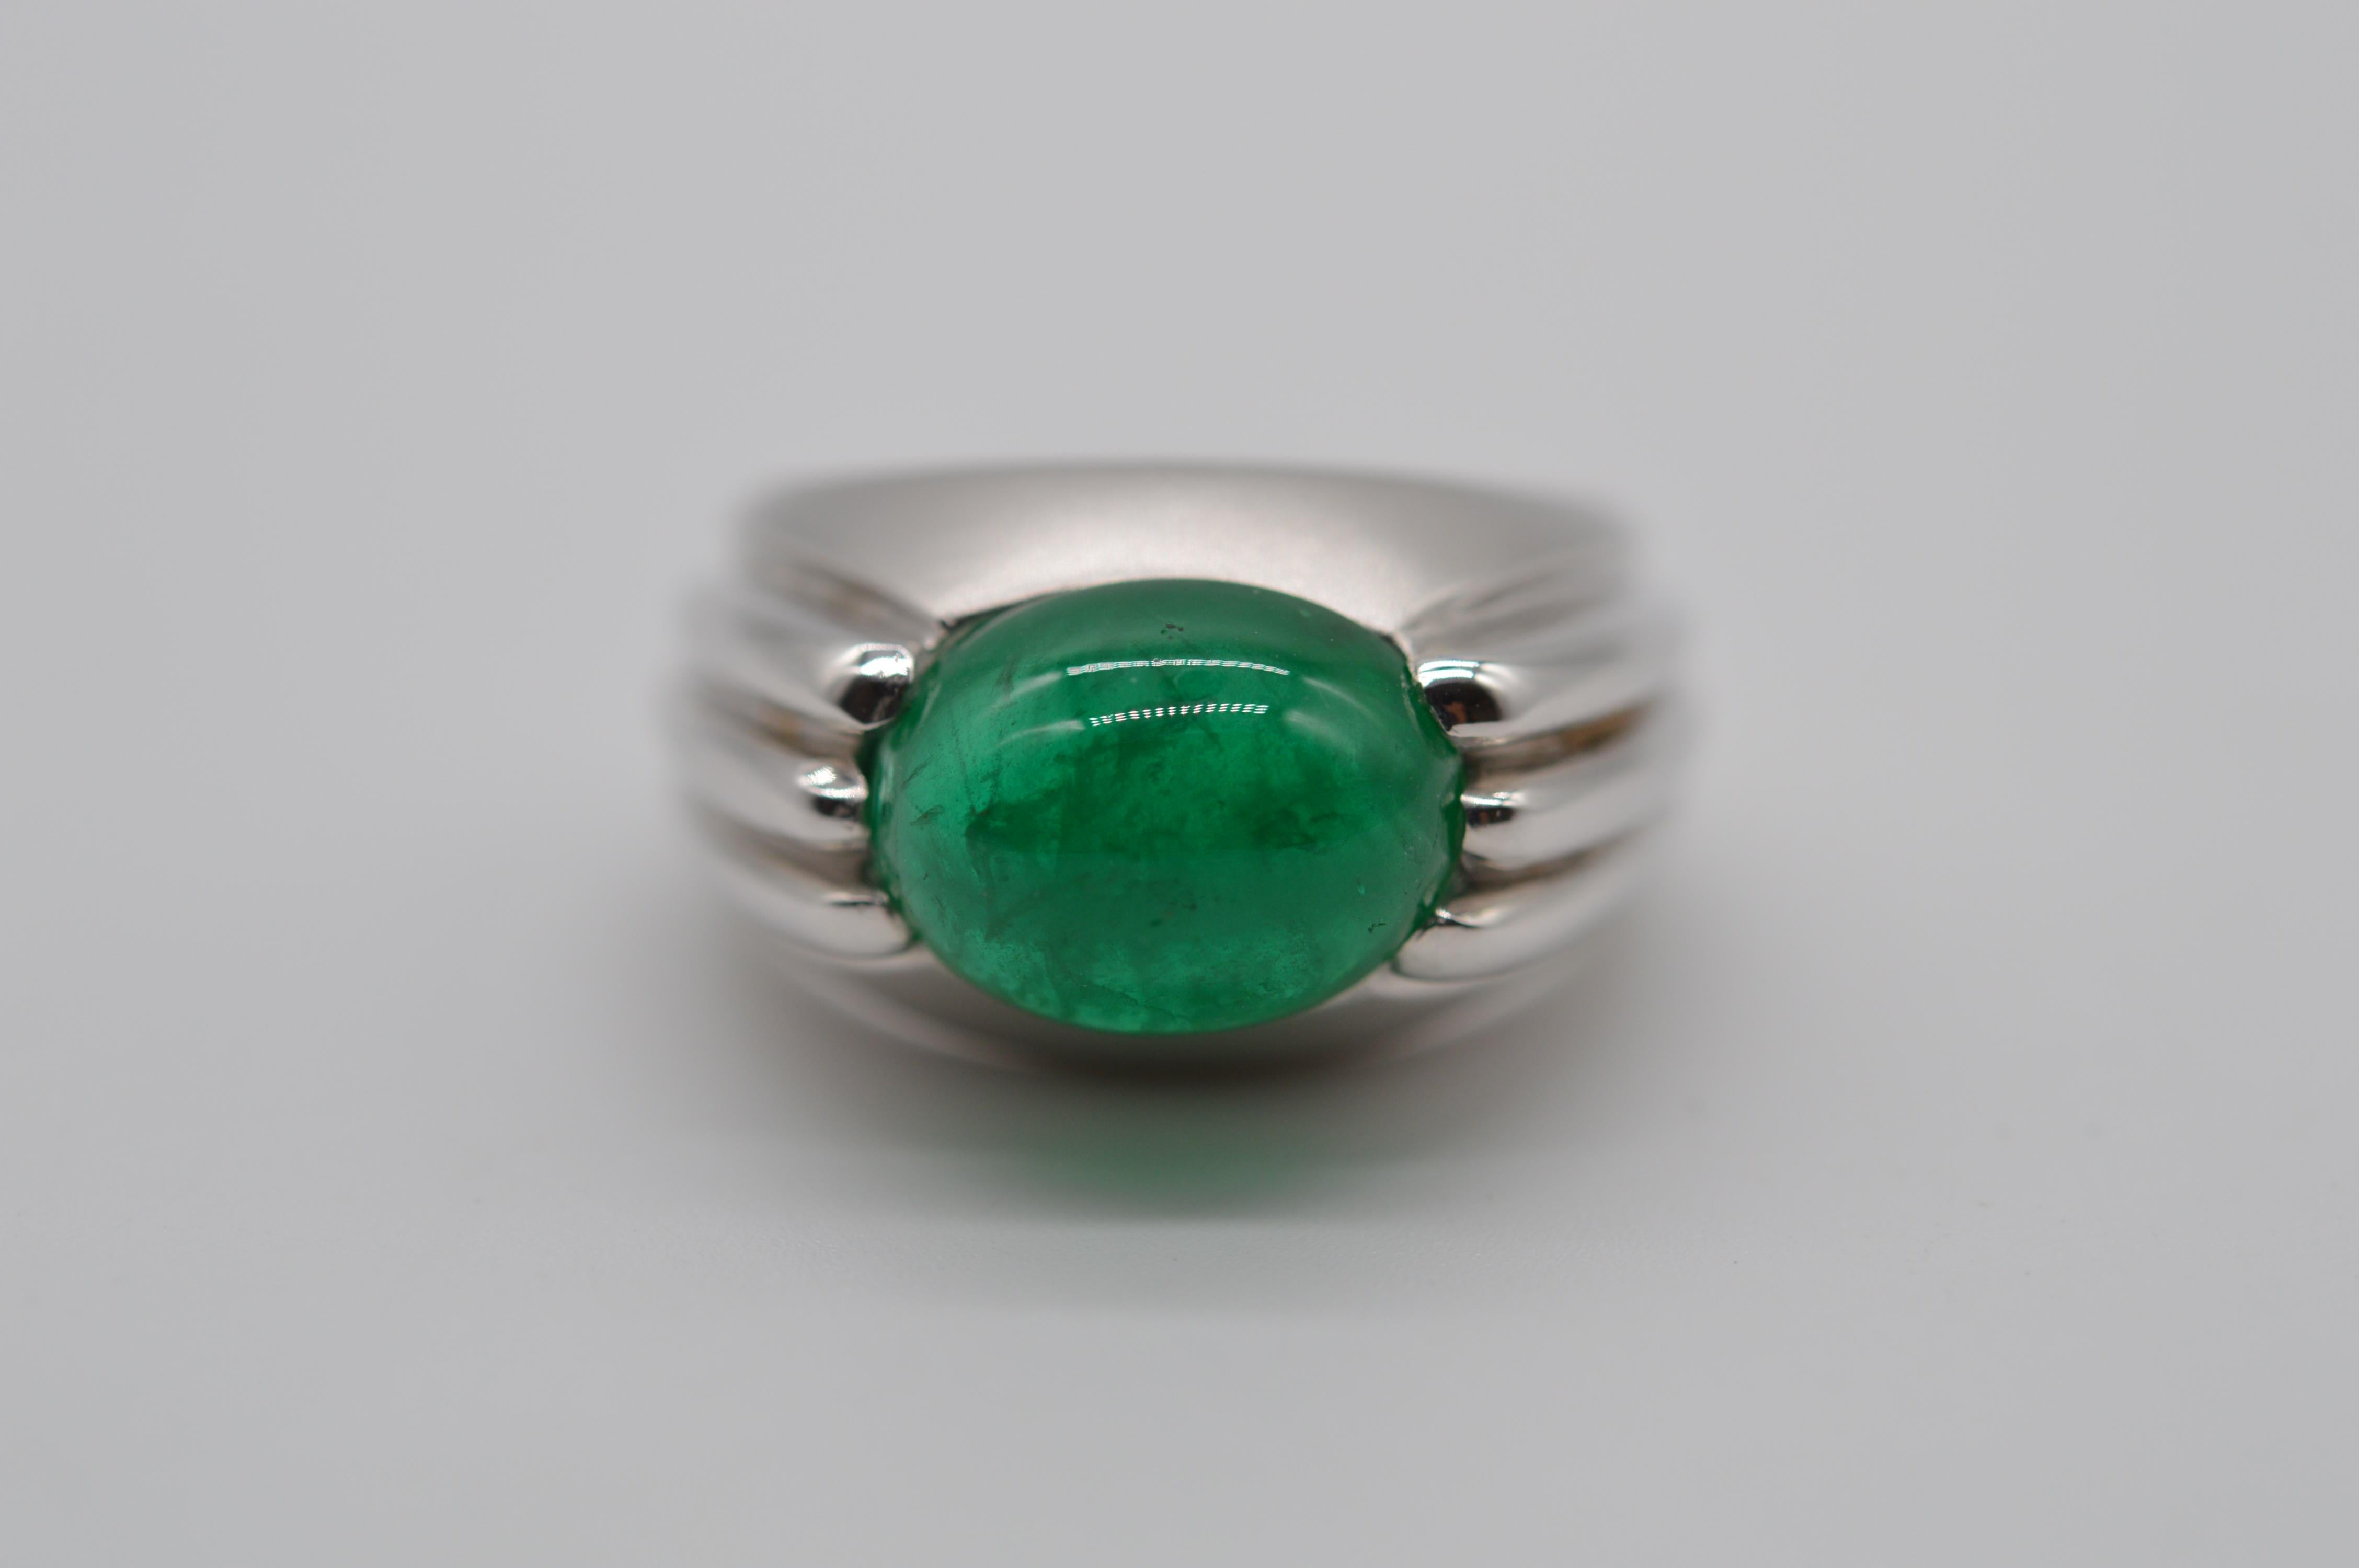 Zambian Cabochon Emerald Ring 7.25 carats Unworn
Mounted in an 18K White Gold Ring
The ring size is 59
The total weight is 21 grams
Unworn condition